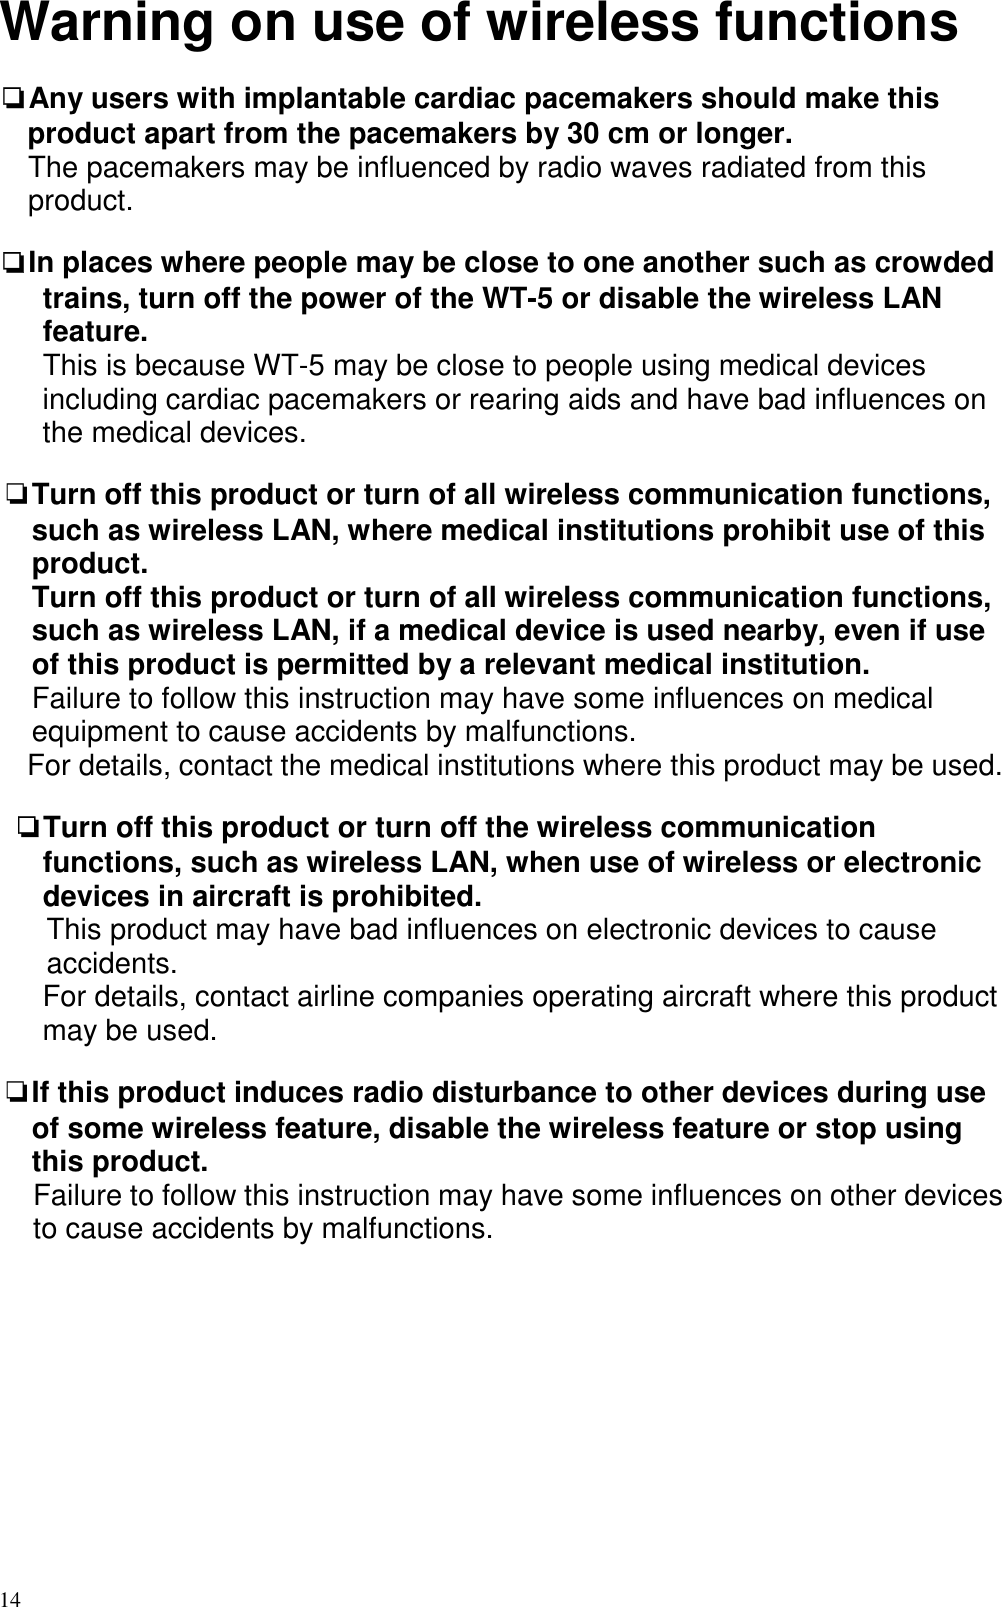   14 Warning on use of wireless functions  ❏Any users with implantable cardiac pacemakers should make this product apart from the pacemakers by 30 cm or longer. The pacemakers may be influenced by radio waves radiated from this product.  ❏In places where people may be close to one another such as crowded trains, turn off the power of the WT-5 or disable the wireless LAN feature.         This is because WT-5 may be close to people using medical devices including cardiac pacemakers or rearing aids and have bad influences on the medical devices.  ❏Turn off this product or turn of all wireless communication functions, such as wireless LAN, where medical institutions prohibit use of this product.     Turn off this product or turn of all wireless communication functions, such as wireless LAN, if a medical device is used nearby, even if use of this product is permitted by a relevant medical institution.   Failure to follow this instruction may have some influences on medical equipment to cause accidents by malfunctions. For details, contact the medical institutions where this product may be used.  ❏Turn off this product or turn off the wireless communication functions, such as wireless LAN, when use of wireless or electronic devices in aircraft is prohibited. This product may have bad influences on electronic devices to cause accidents. For details, contact airline companies operating aircraft where this product may be used.  ❏If this product induces radio disturbance to other devices during use of some wireless feature, disable the wireless feature or stop using this product.  Failure to follow this instruction may have some influences on other devices to cause accidents by malfunctions.             